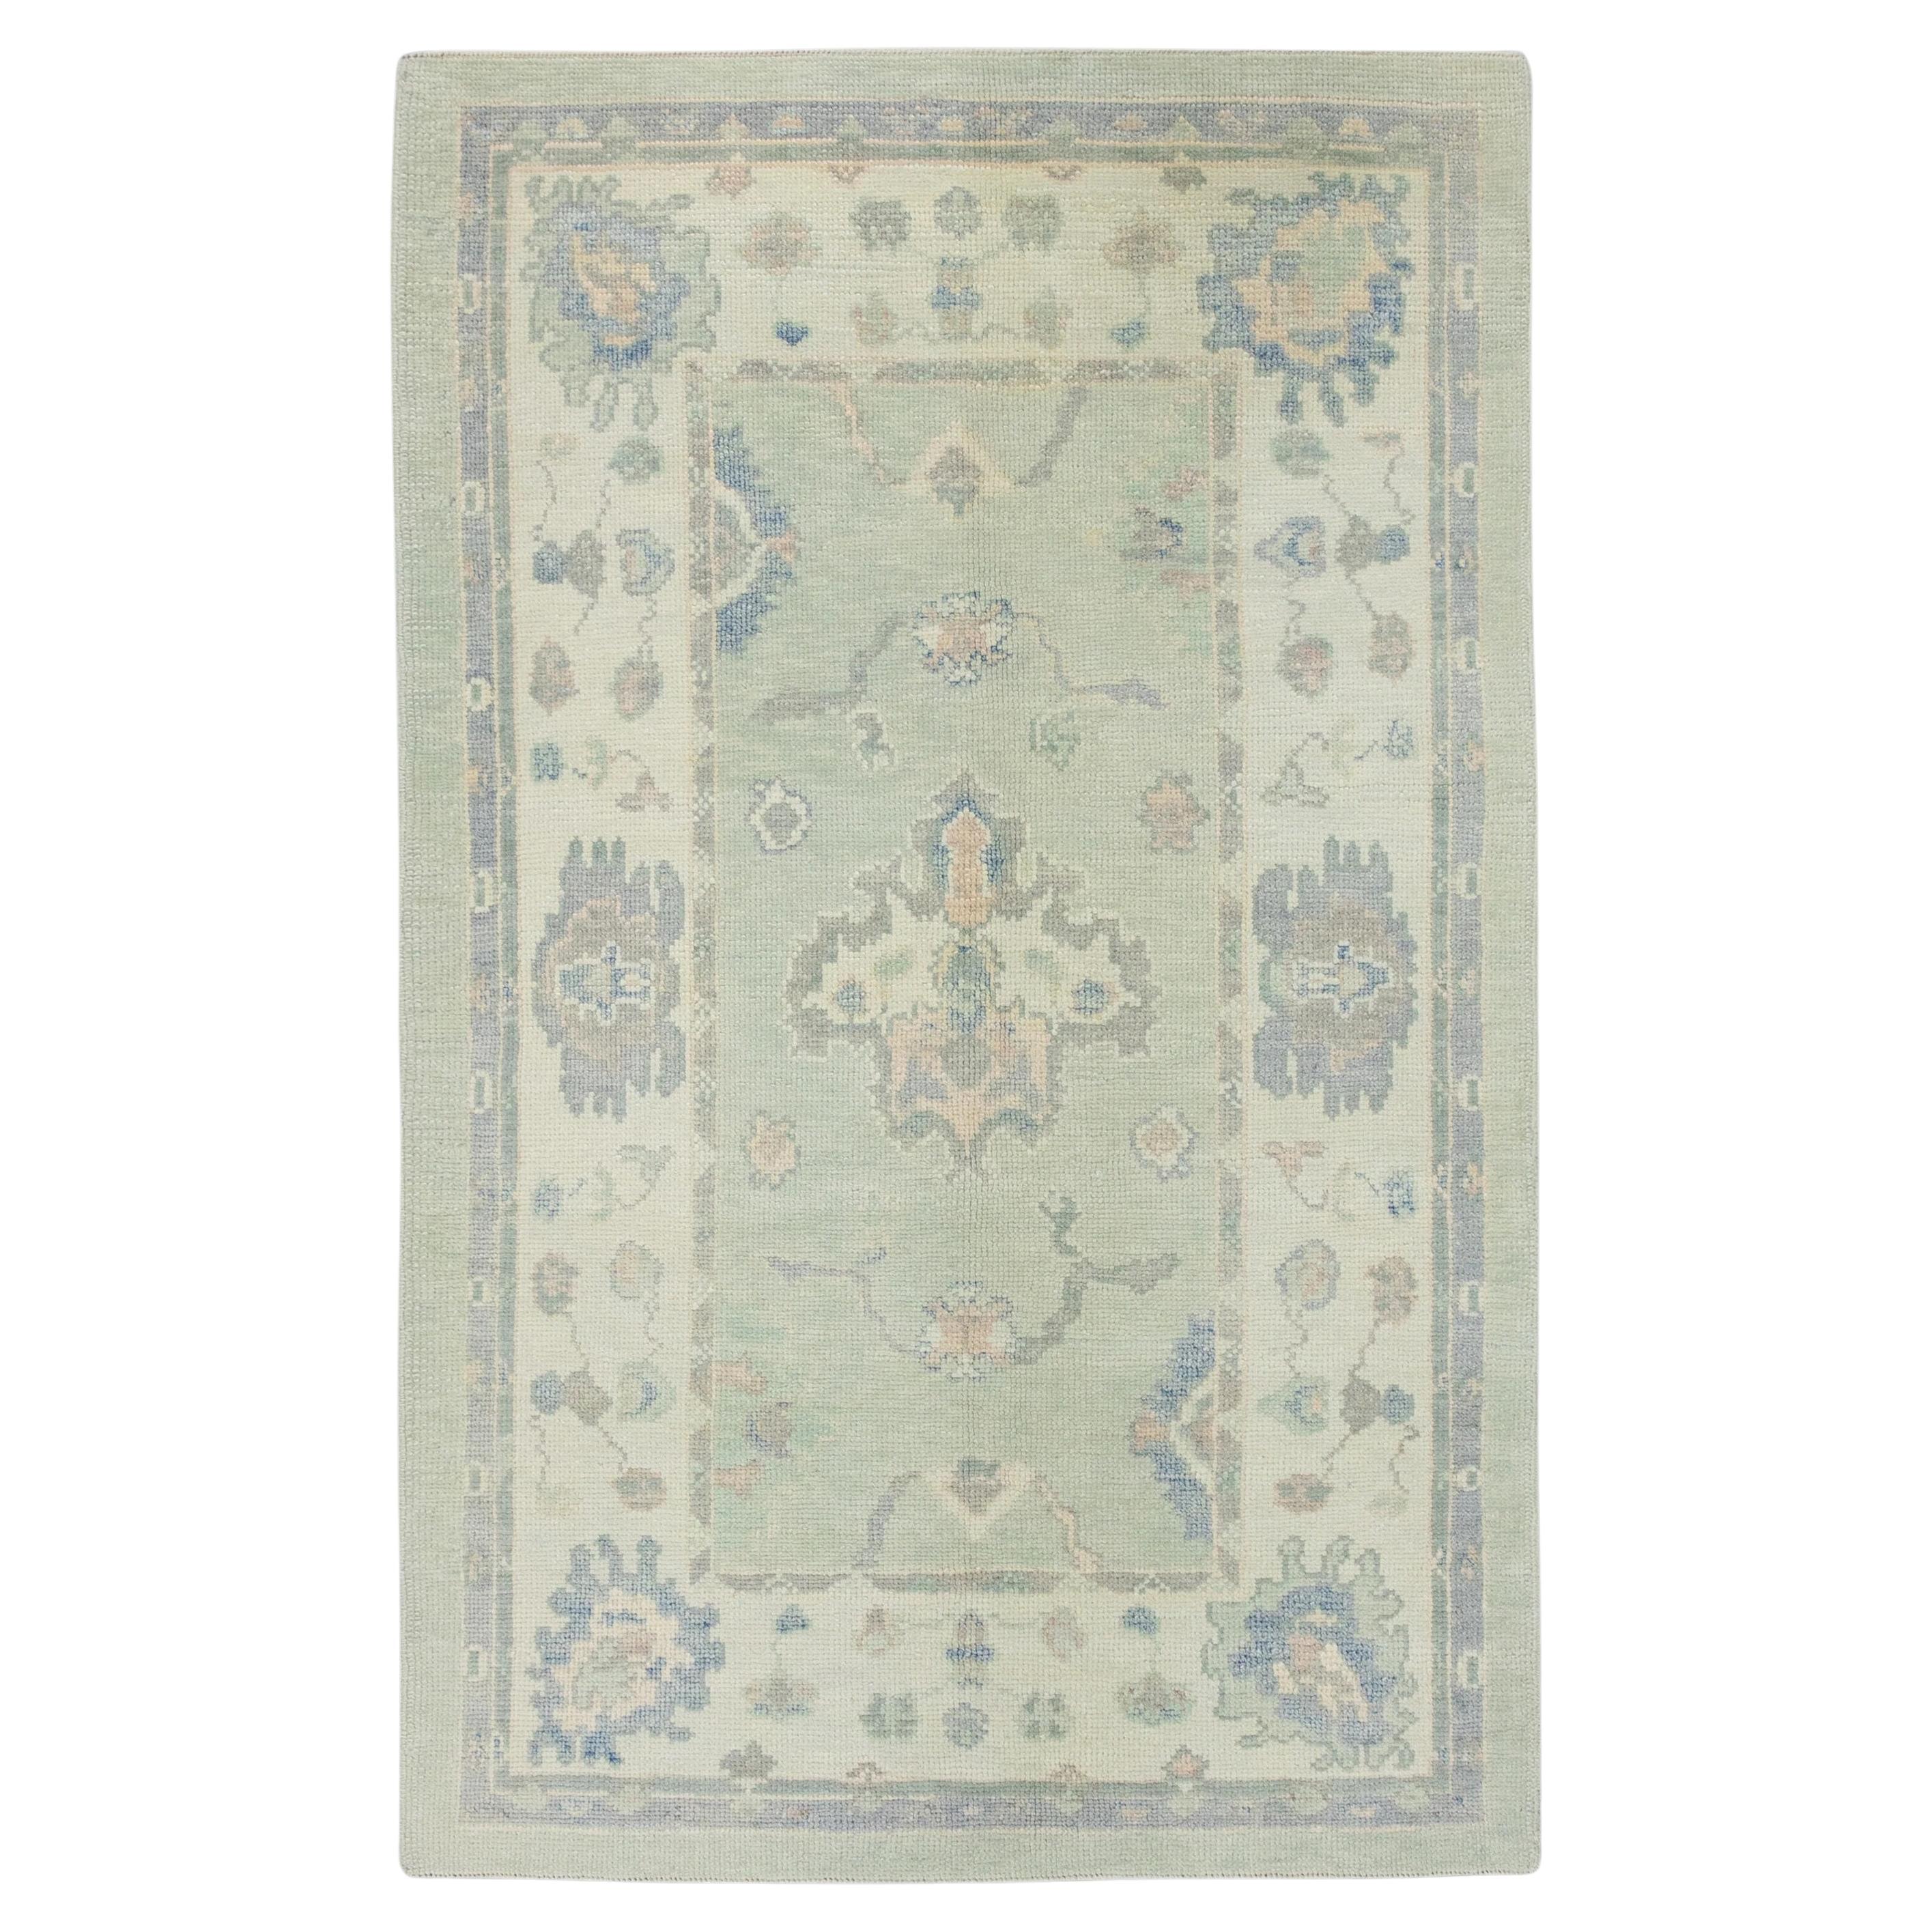 Green and Blue Handwoven Wool Floral Pattern Turkish Oushak Rug 4' x 6'2"